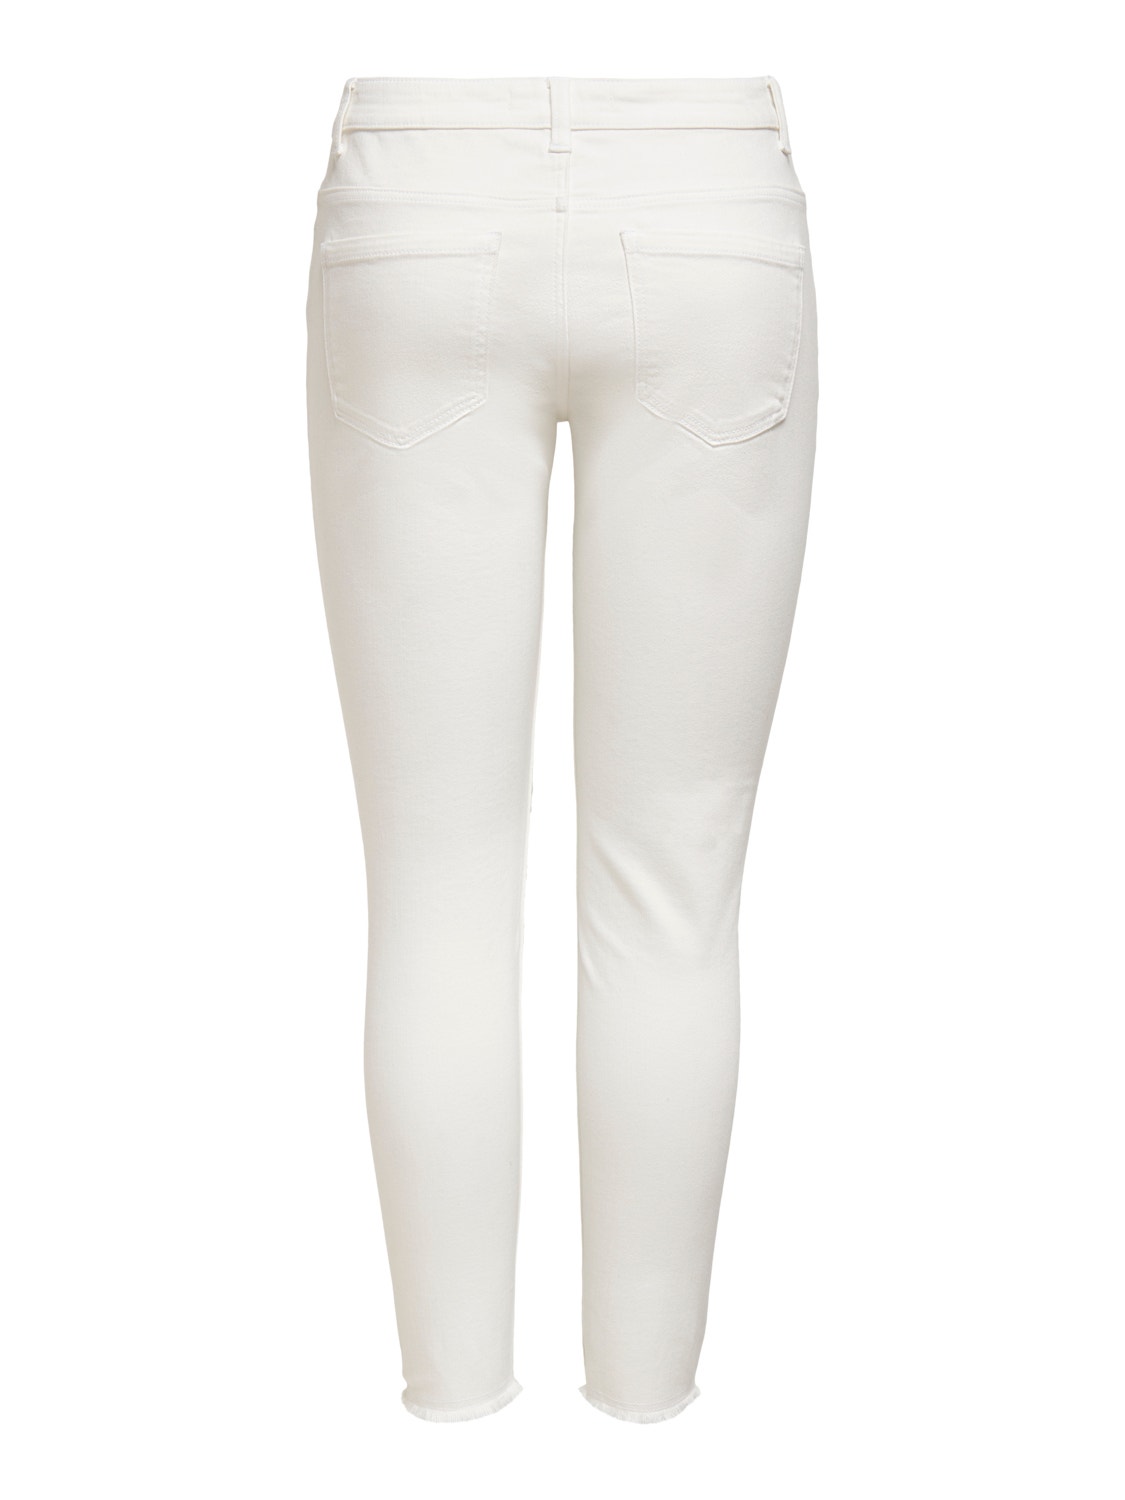 ONLY Skinny Fit Jeans -White - 15258134